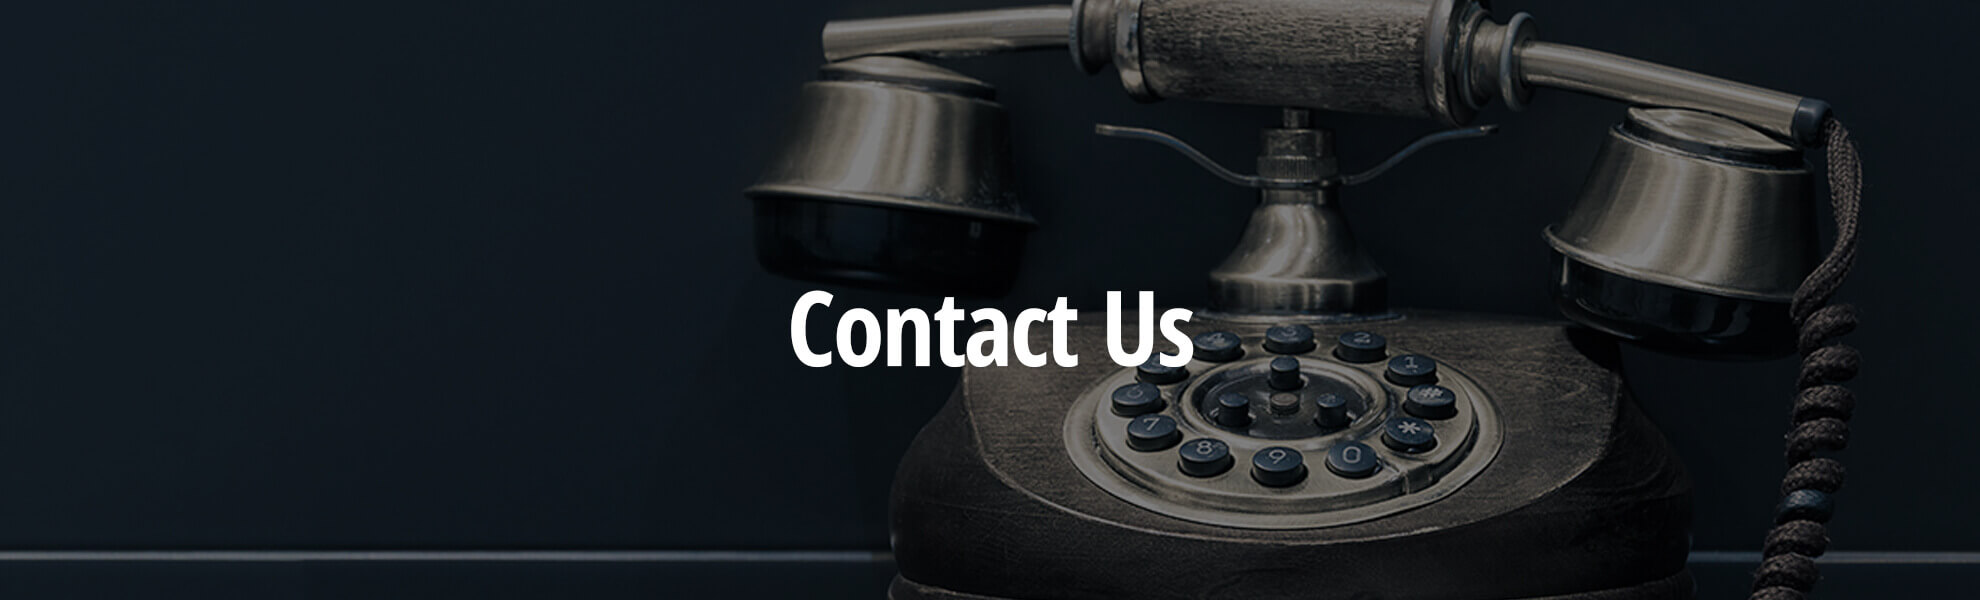 Contact Us Page Banner